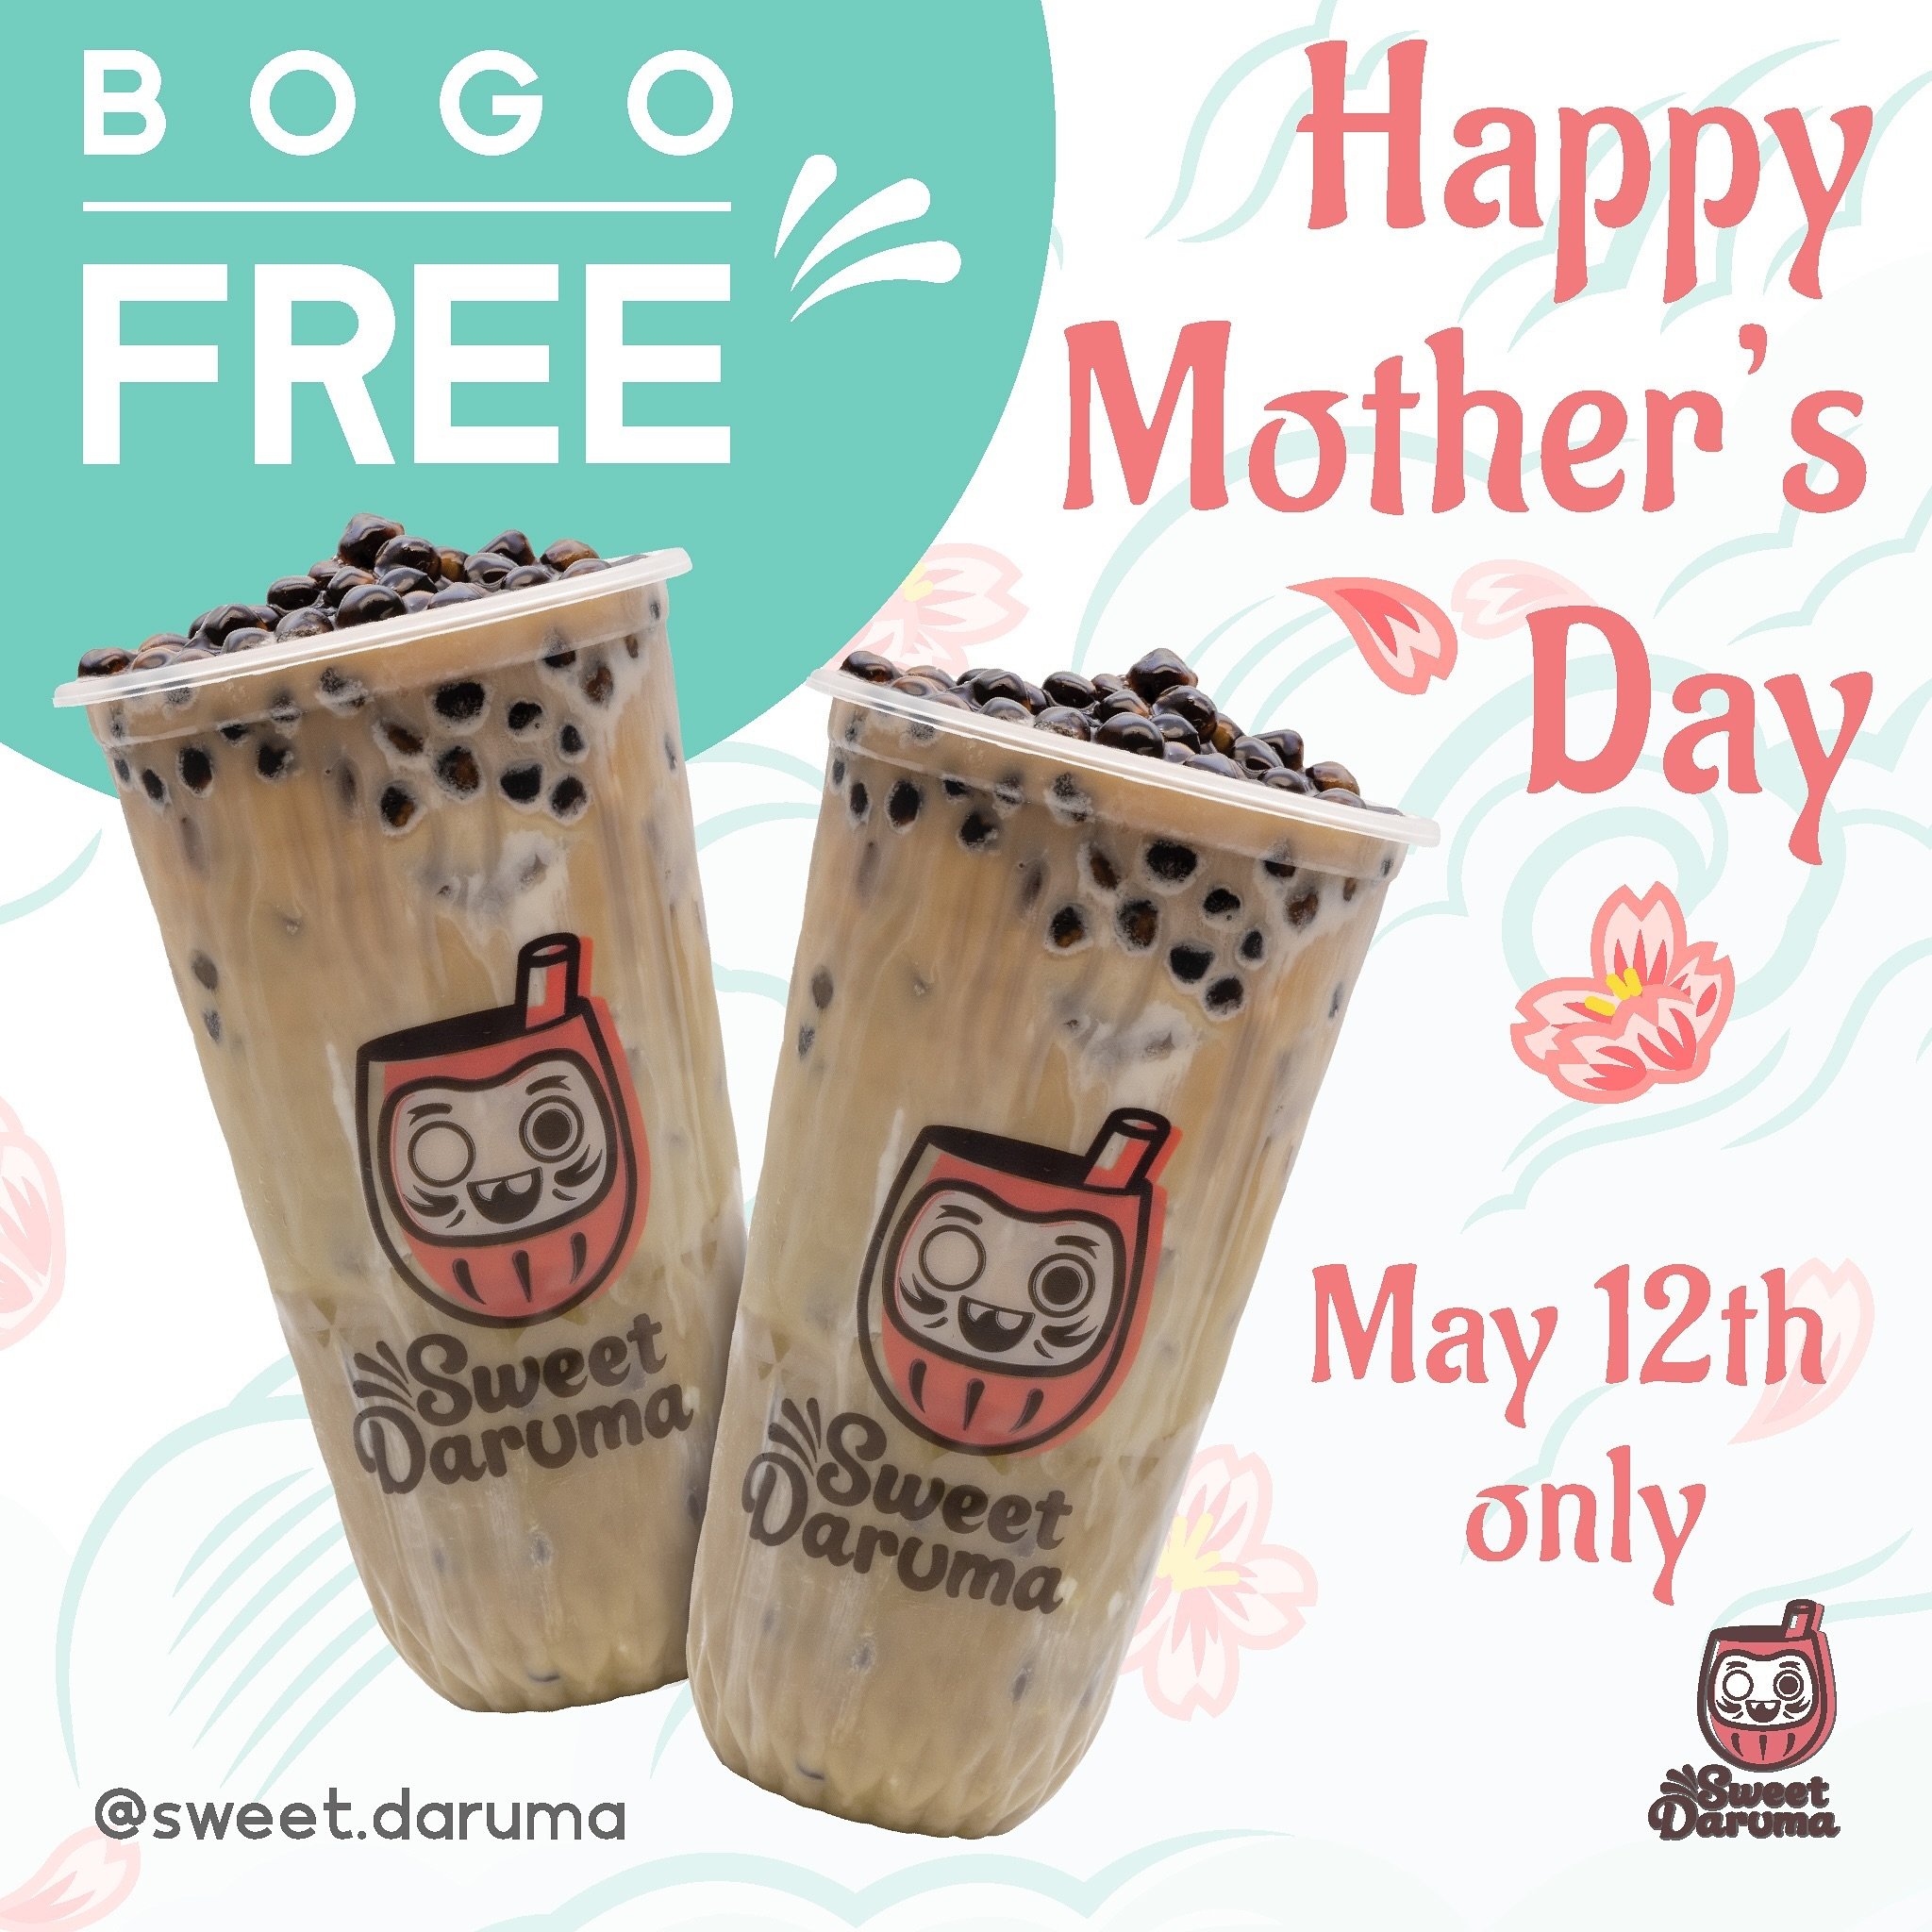 Happy Mother&rsquo;s Day! 🌸 Today, celebrate with us and enjoy our special offer: Buy one, get one free on Milk Tea for all mothers! Treat your mom to a delicious milk tea 🧋 at our tea wagon. Don&rsquo;t miss out on this sweet deal! 💕
.
.
.
#happy